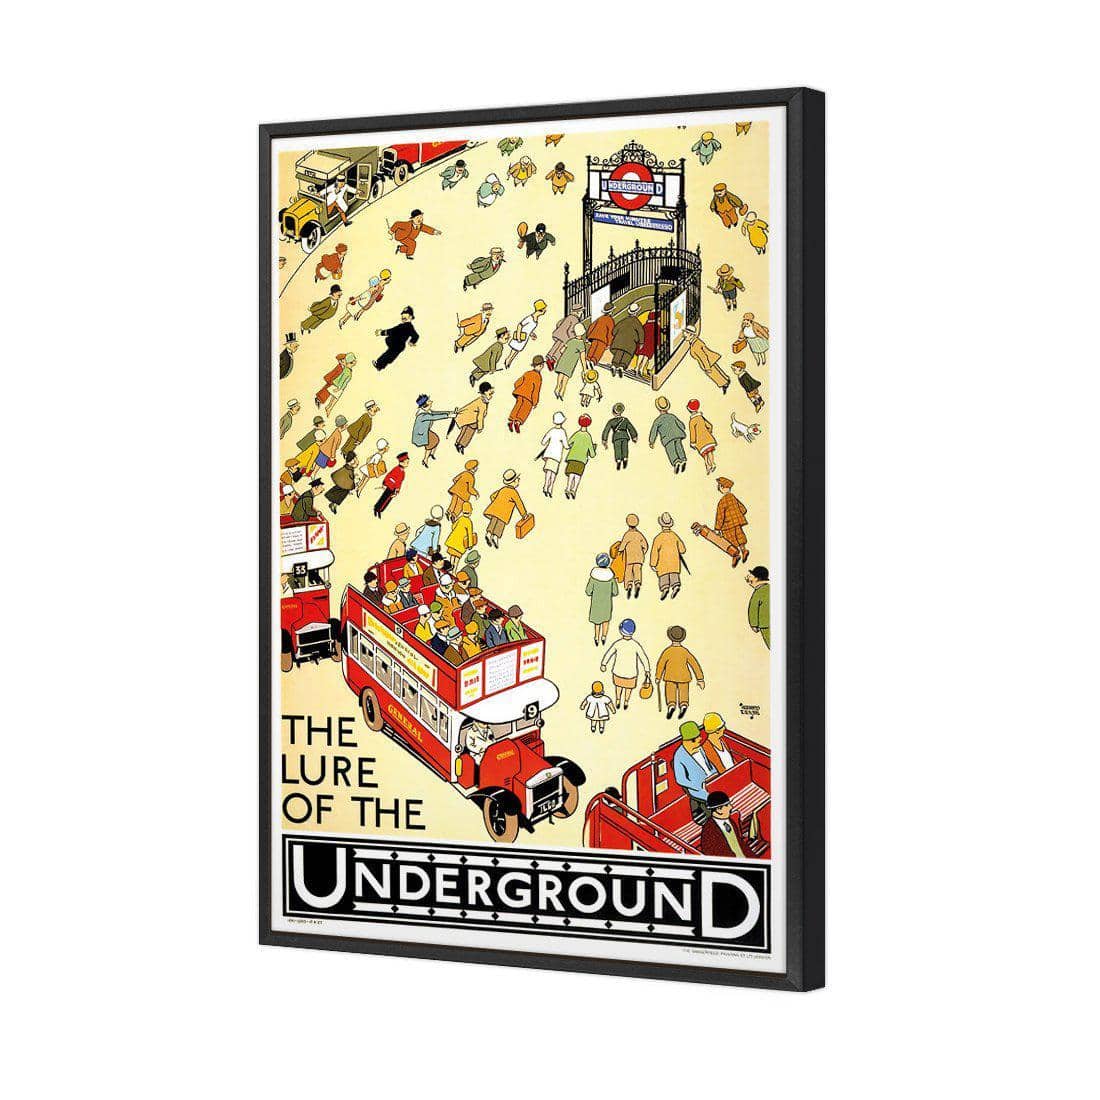 The Lure Of The Underground Canvas Art-Canvas-Wall Art Designs-45x30cm-Canvas - Black Frame-Wall Art Designs